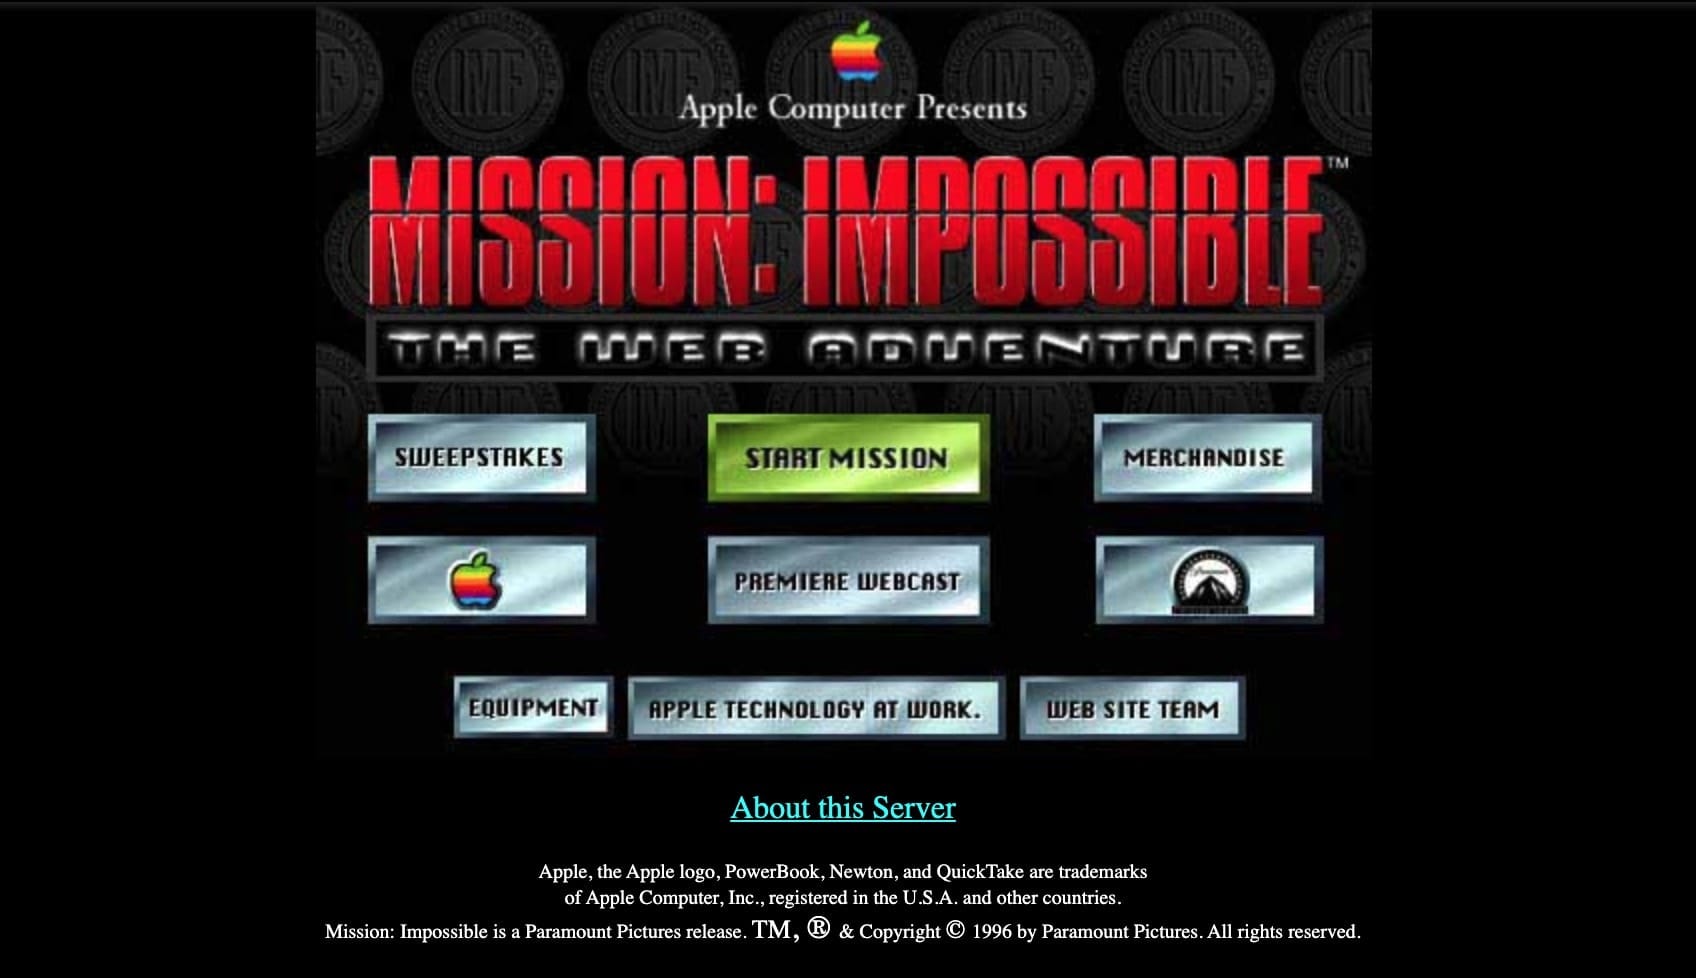 Mission Impossible interactive website from Apple